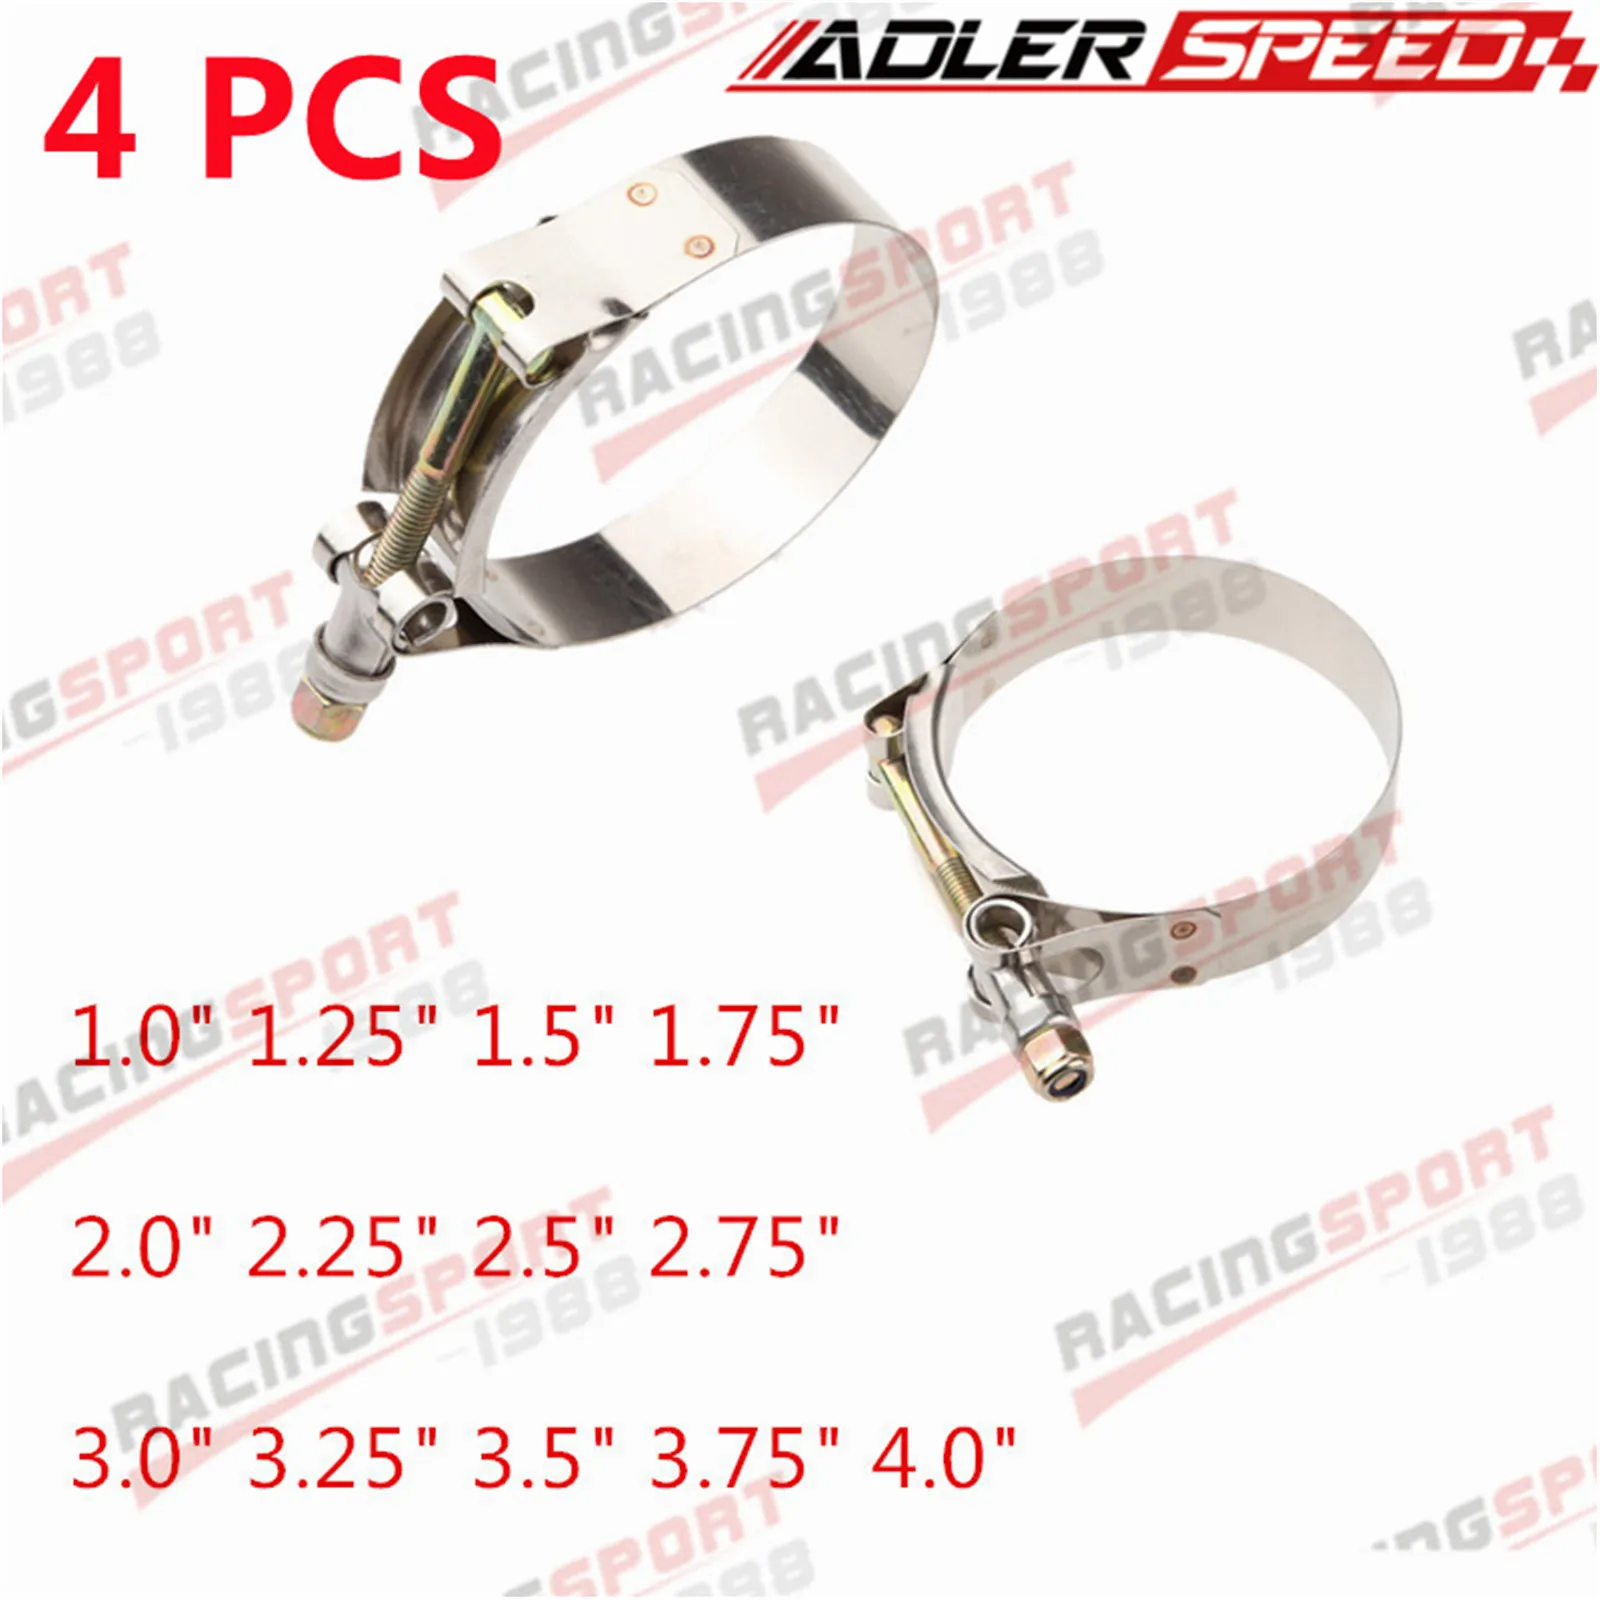 

4PCS 2" 2.25" 2.5" 3" 3.5" T Bolt Clamp T Hose Pipe Clamp Stainless Steel T-Bolt Turbo Silcone Hose Clamp 56-125mm T Clamps Clip